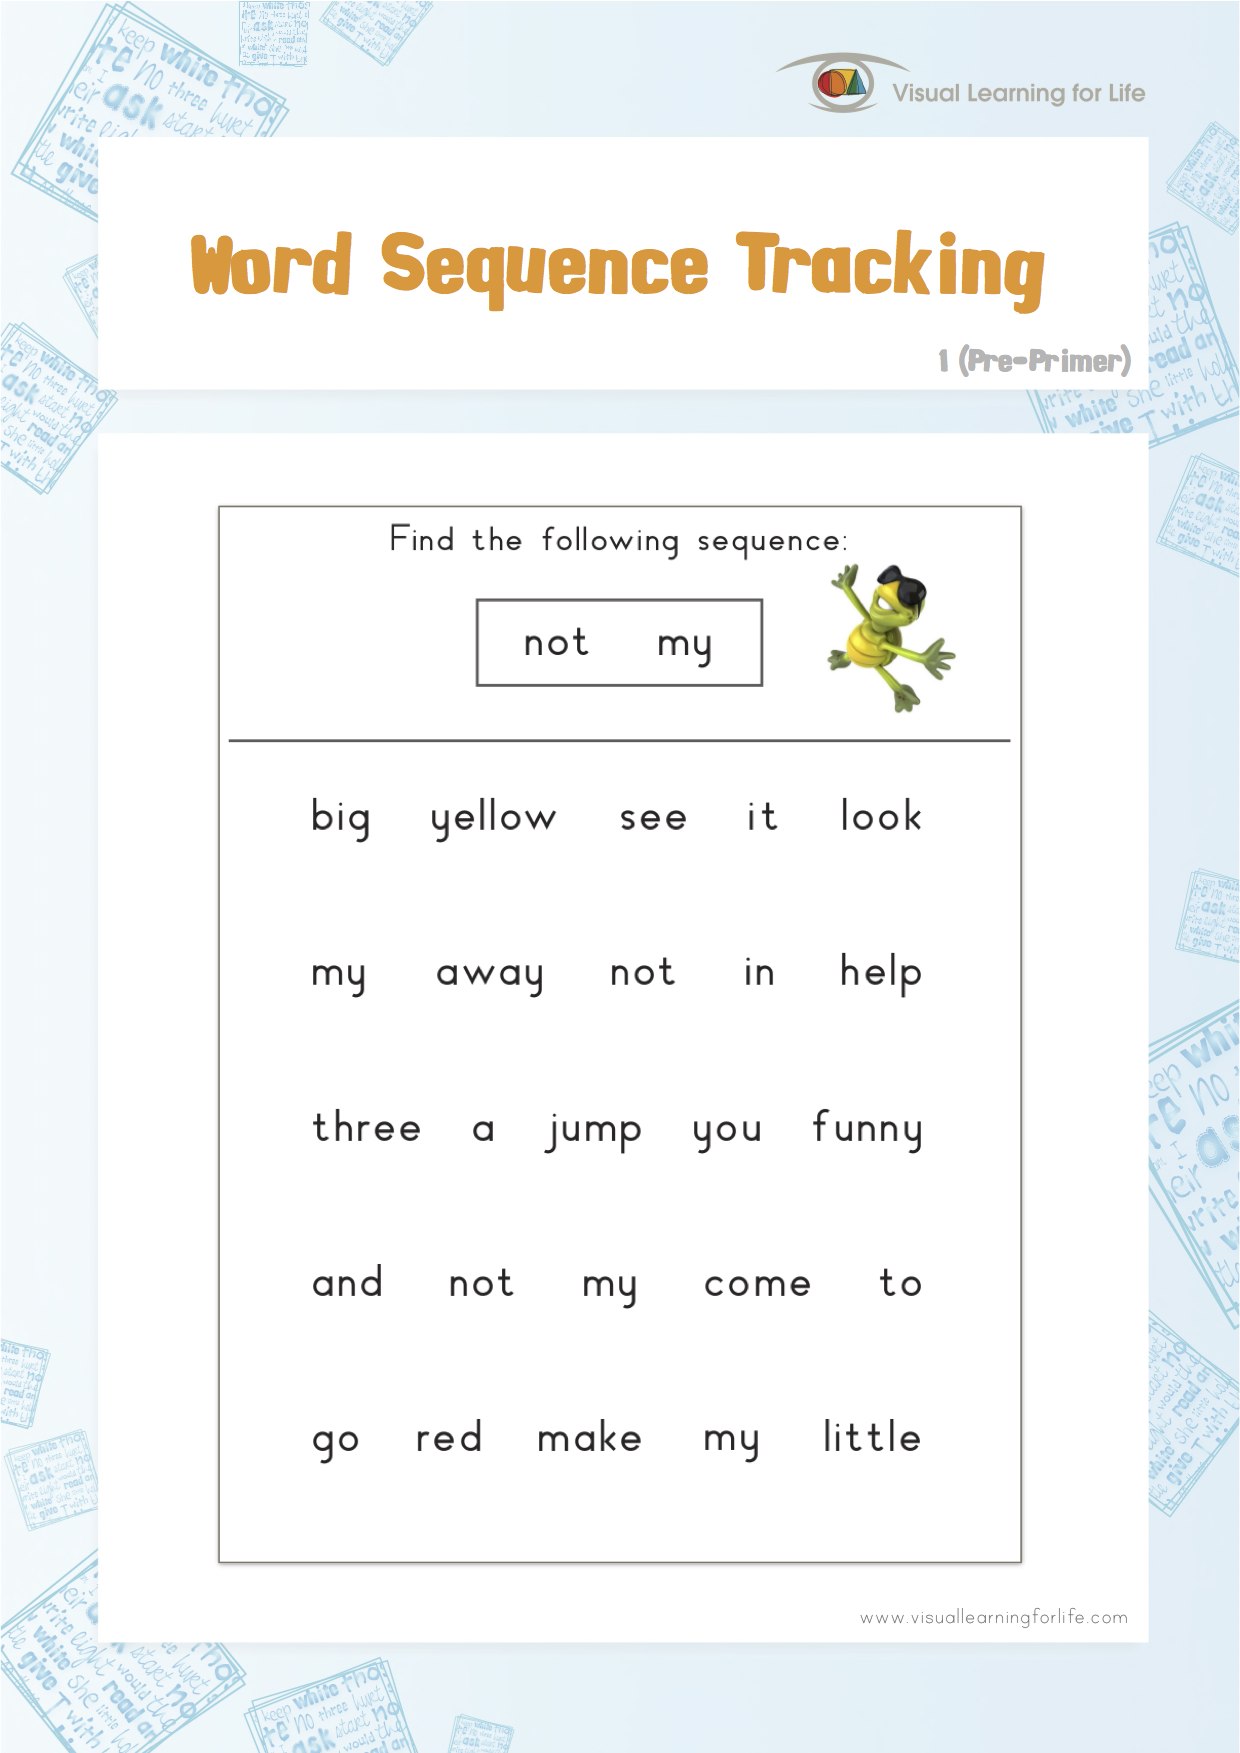 Word Sequence Tracking 1